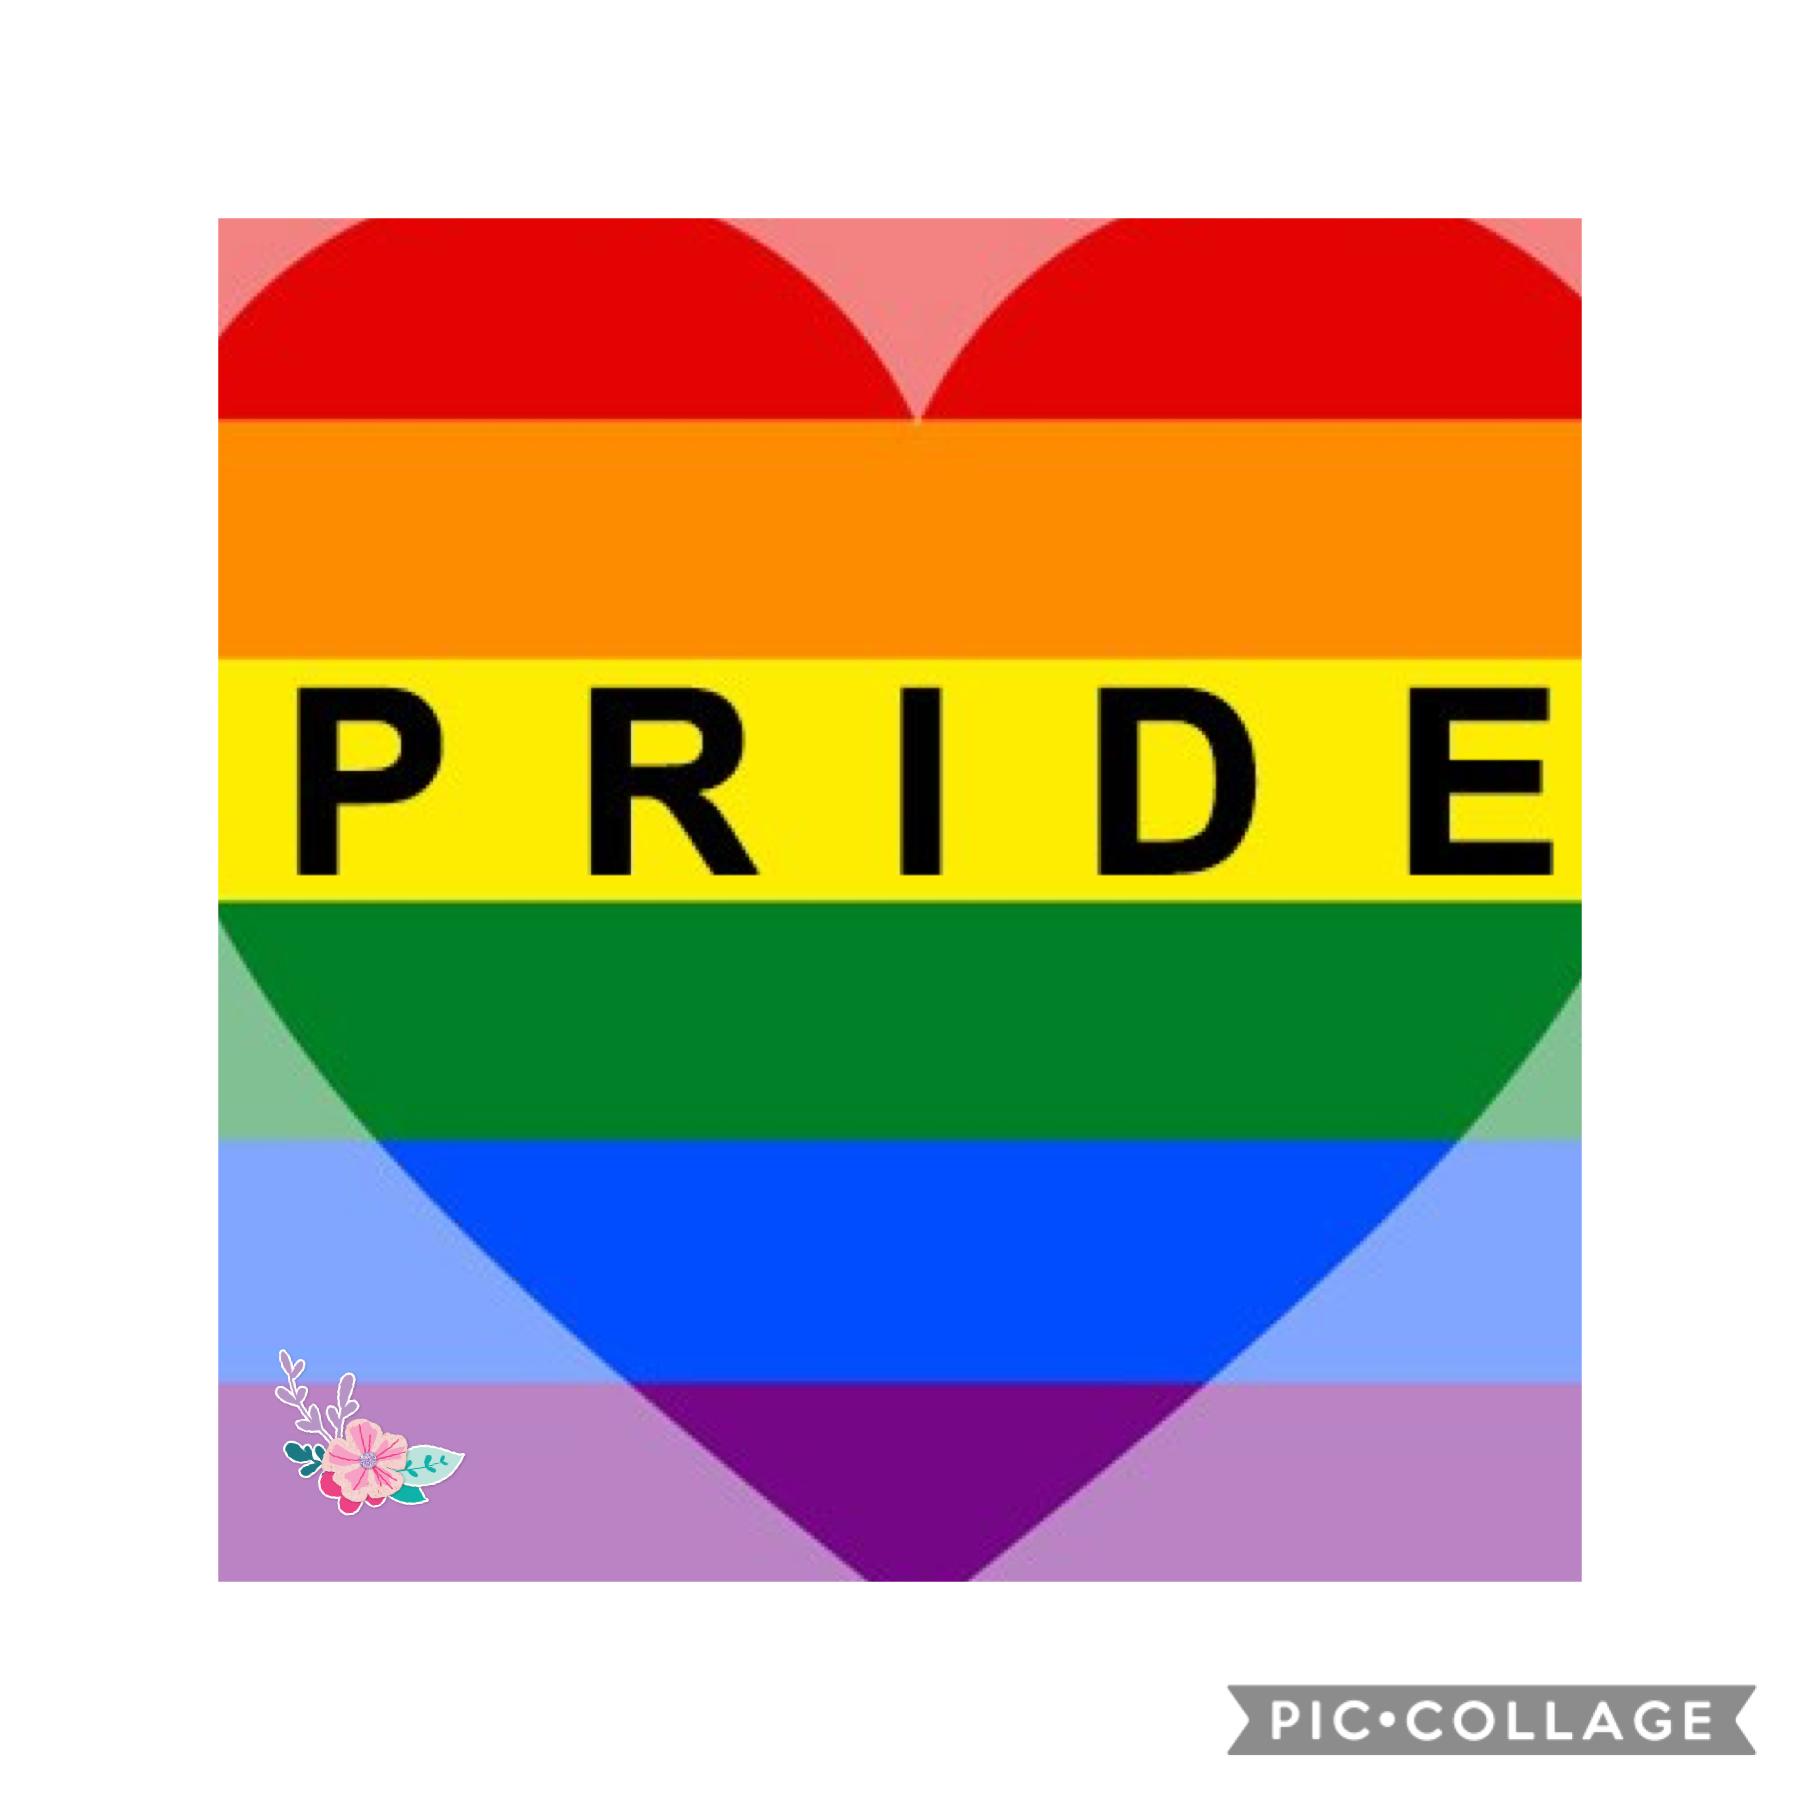 I’m so happy a lot of people are beginning to exept people from lgbt 🏳️‍🌈 